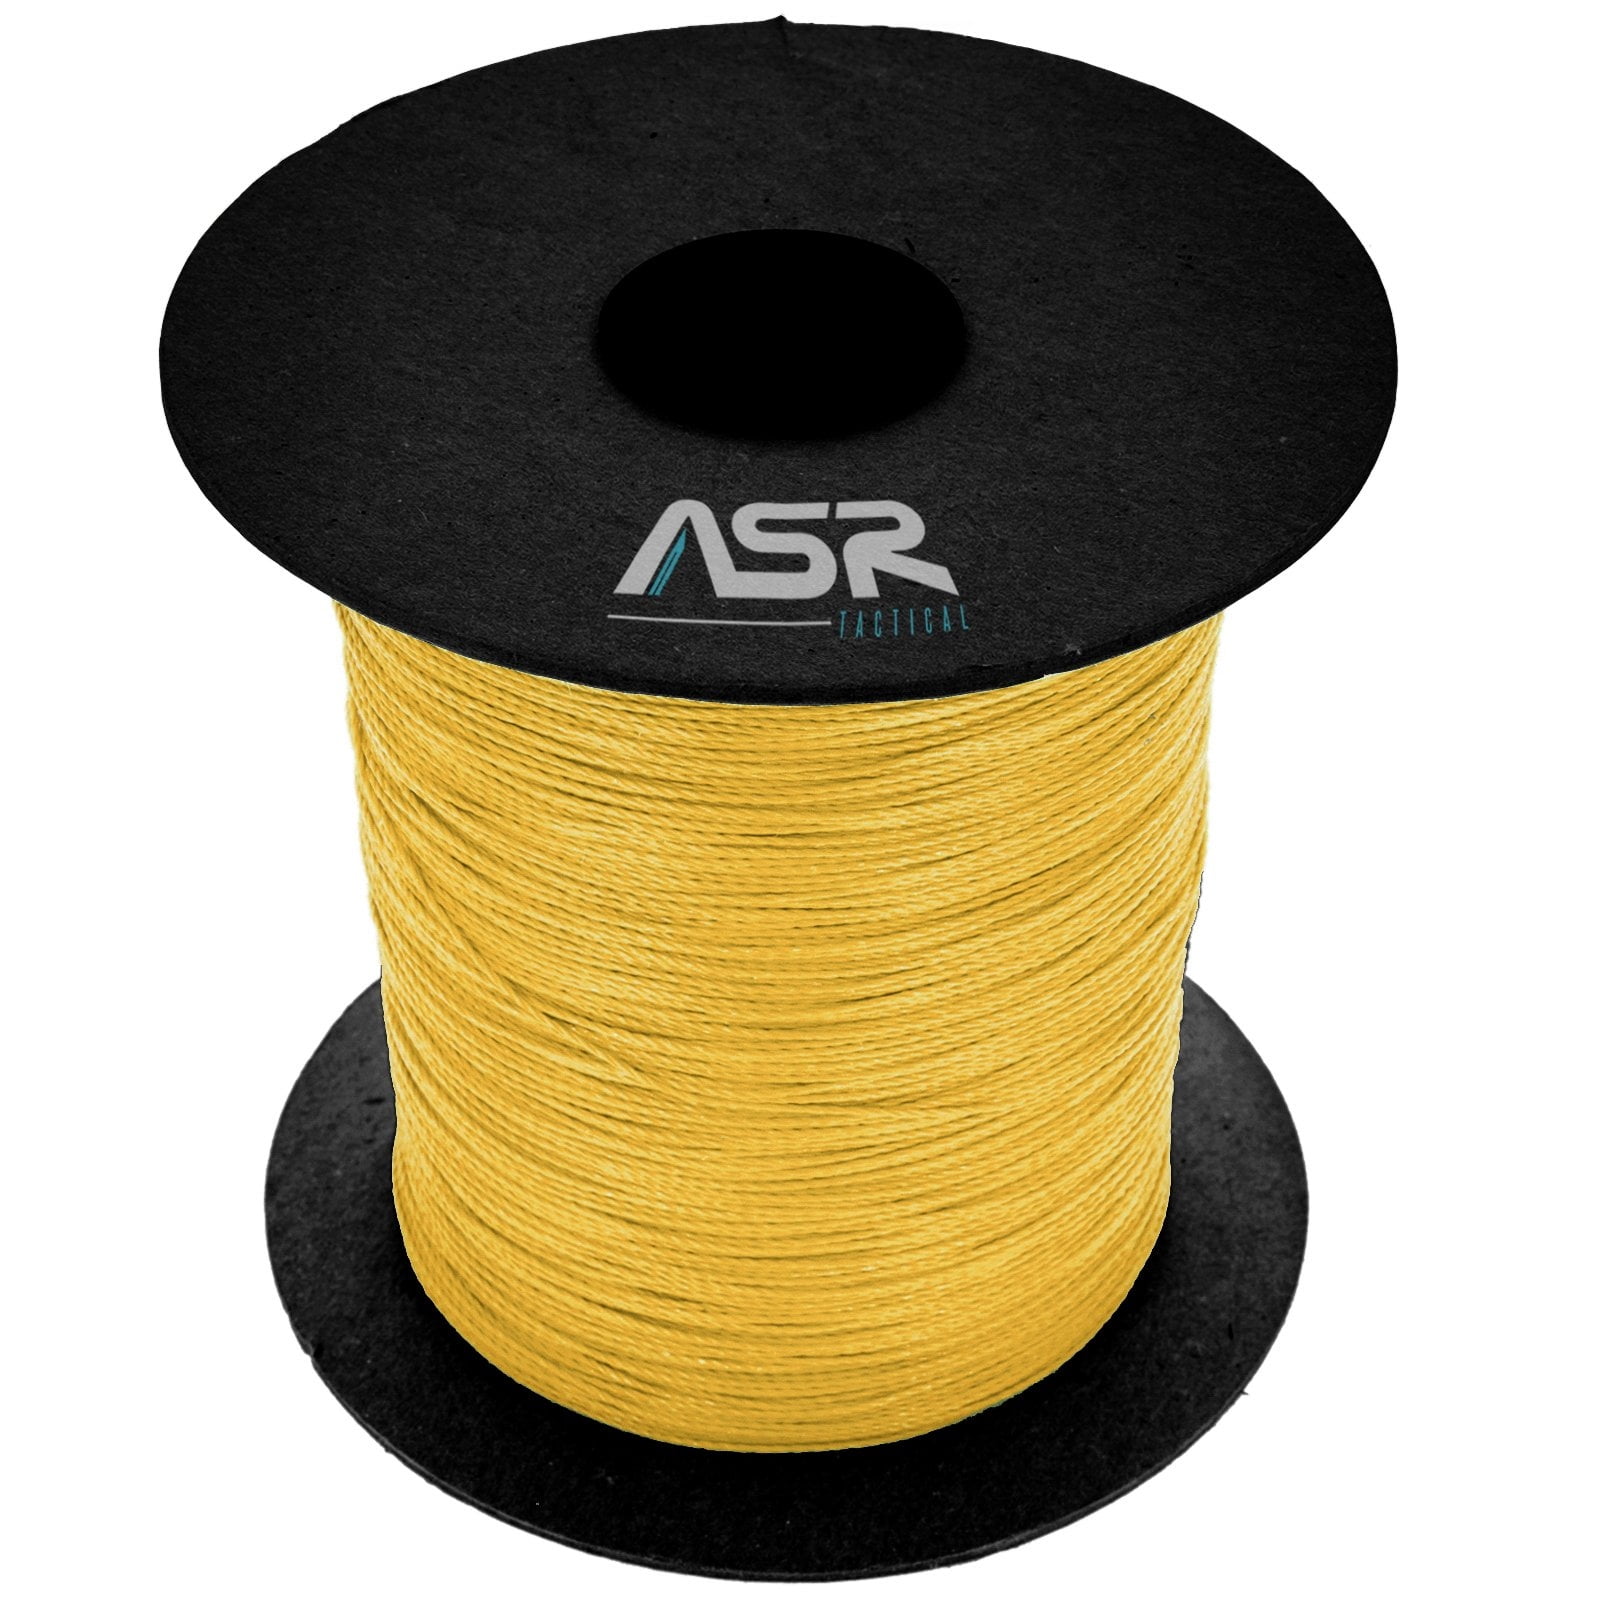 ASR Tactical Braided Kevlar 200lb Strength Survival Cord Rope